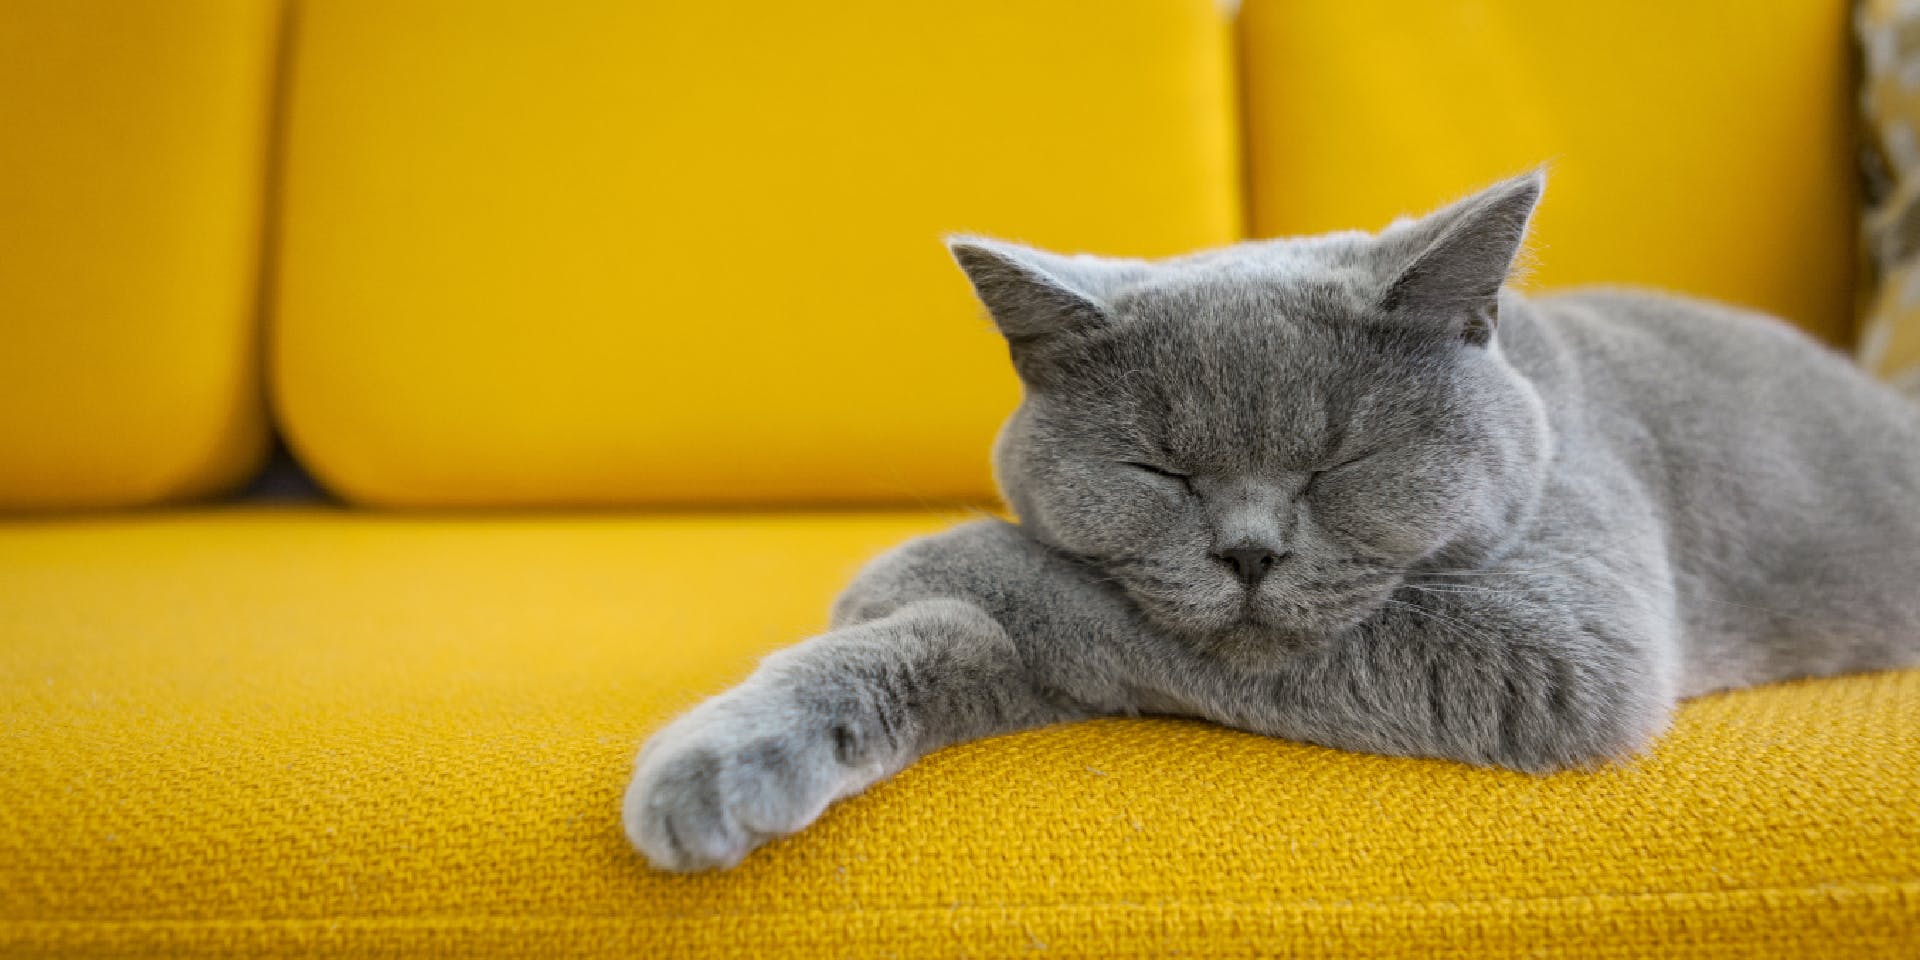 A gray cat sleeping on a yellow couch.